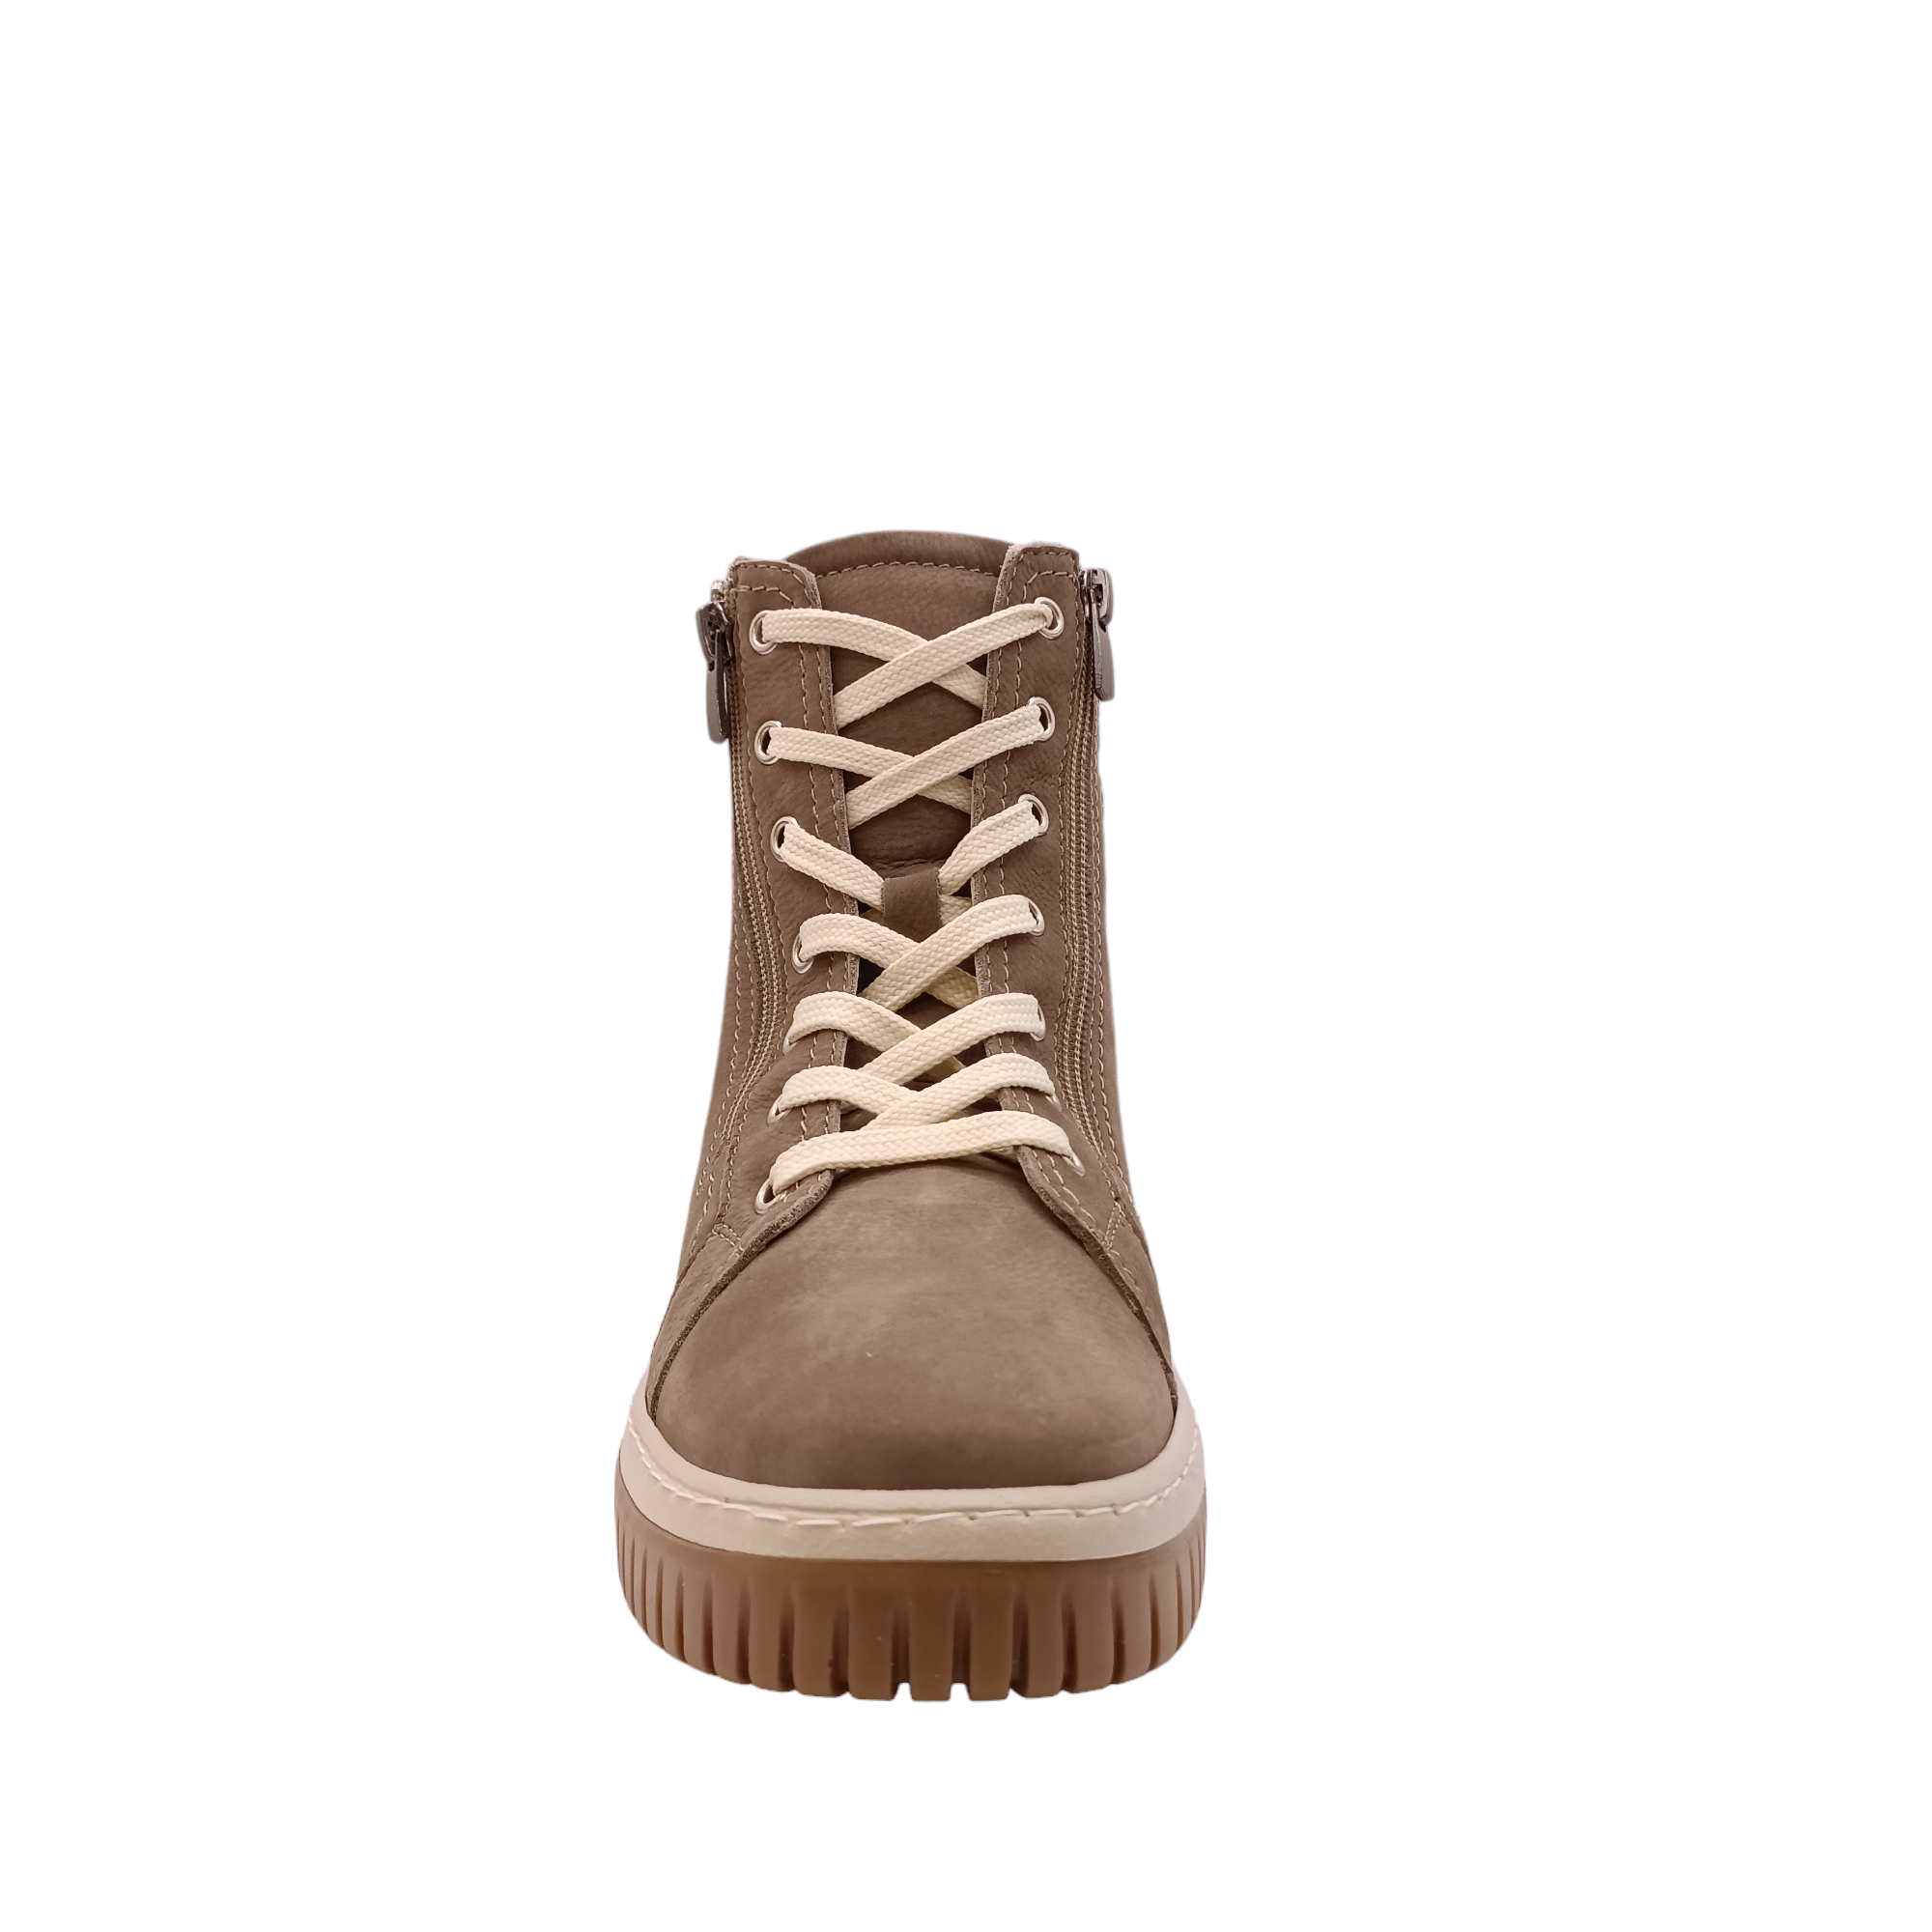 front on view of the boot Petra from Cabello. Soft Turkish taupe coloured leather boot with side zip and light coloured sole and laces. Padded ankle with ruggered grip. Shop Womens Boots Online and In-store with shoe&me Mount Maunganui Tauranga NZ.